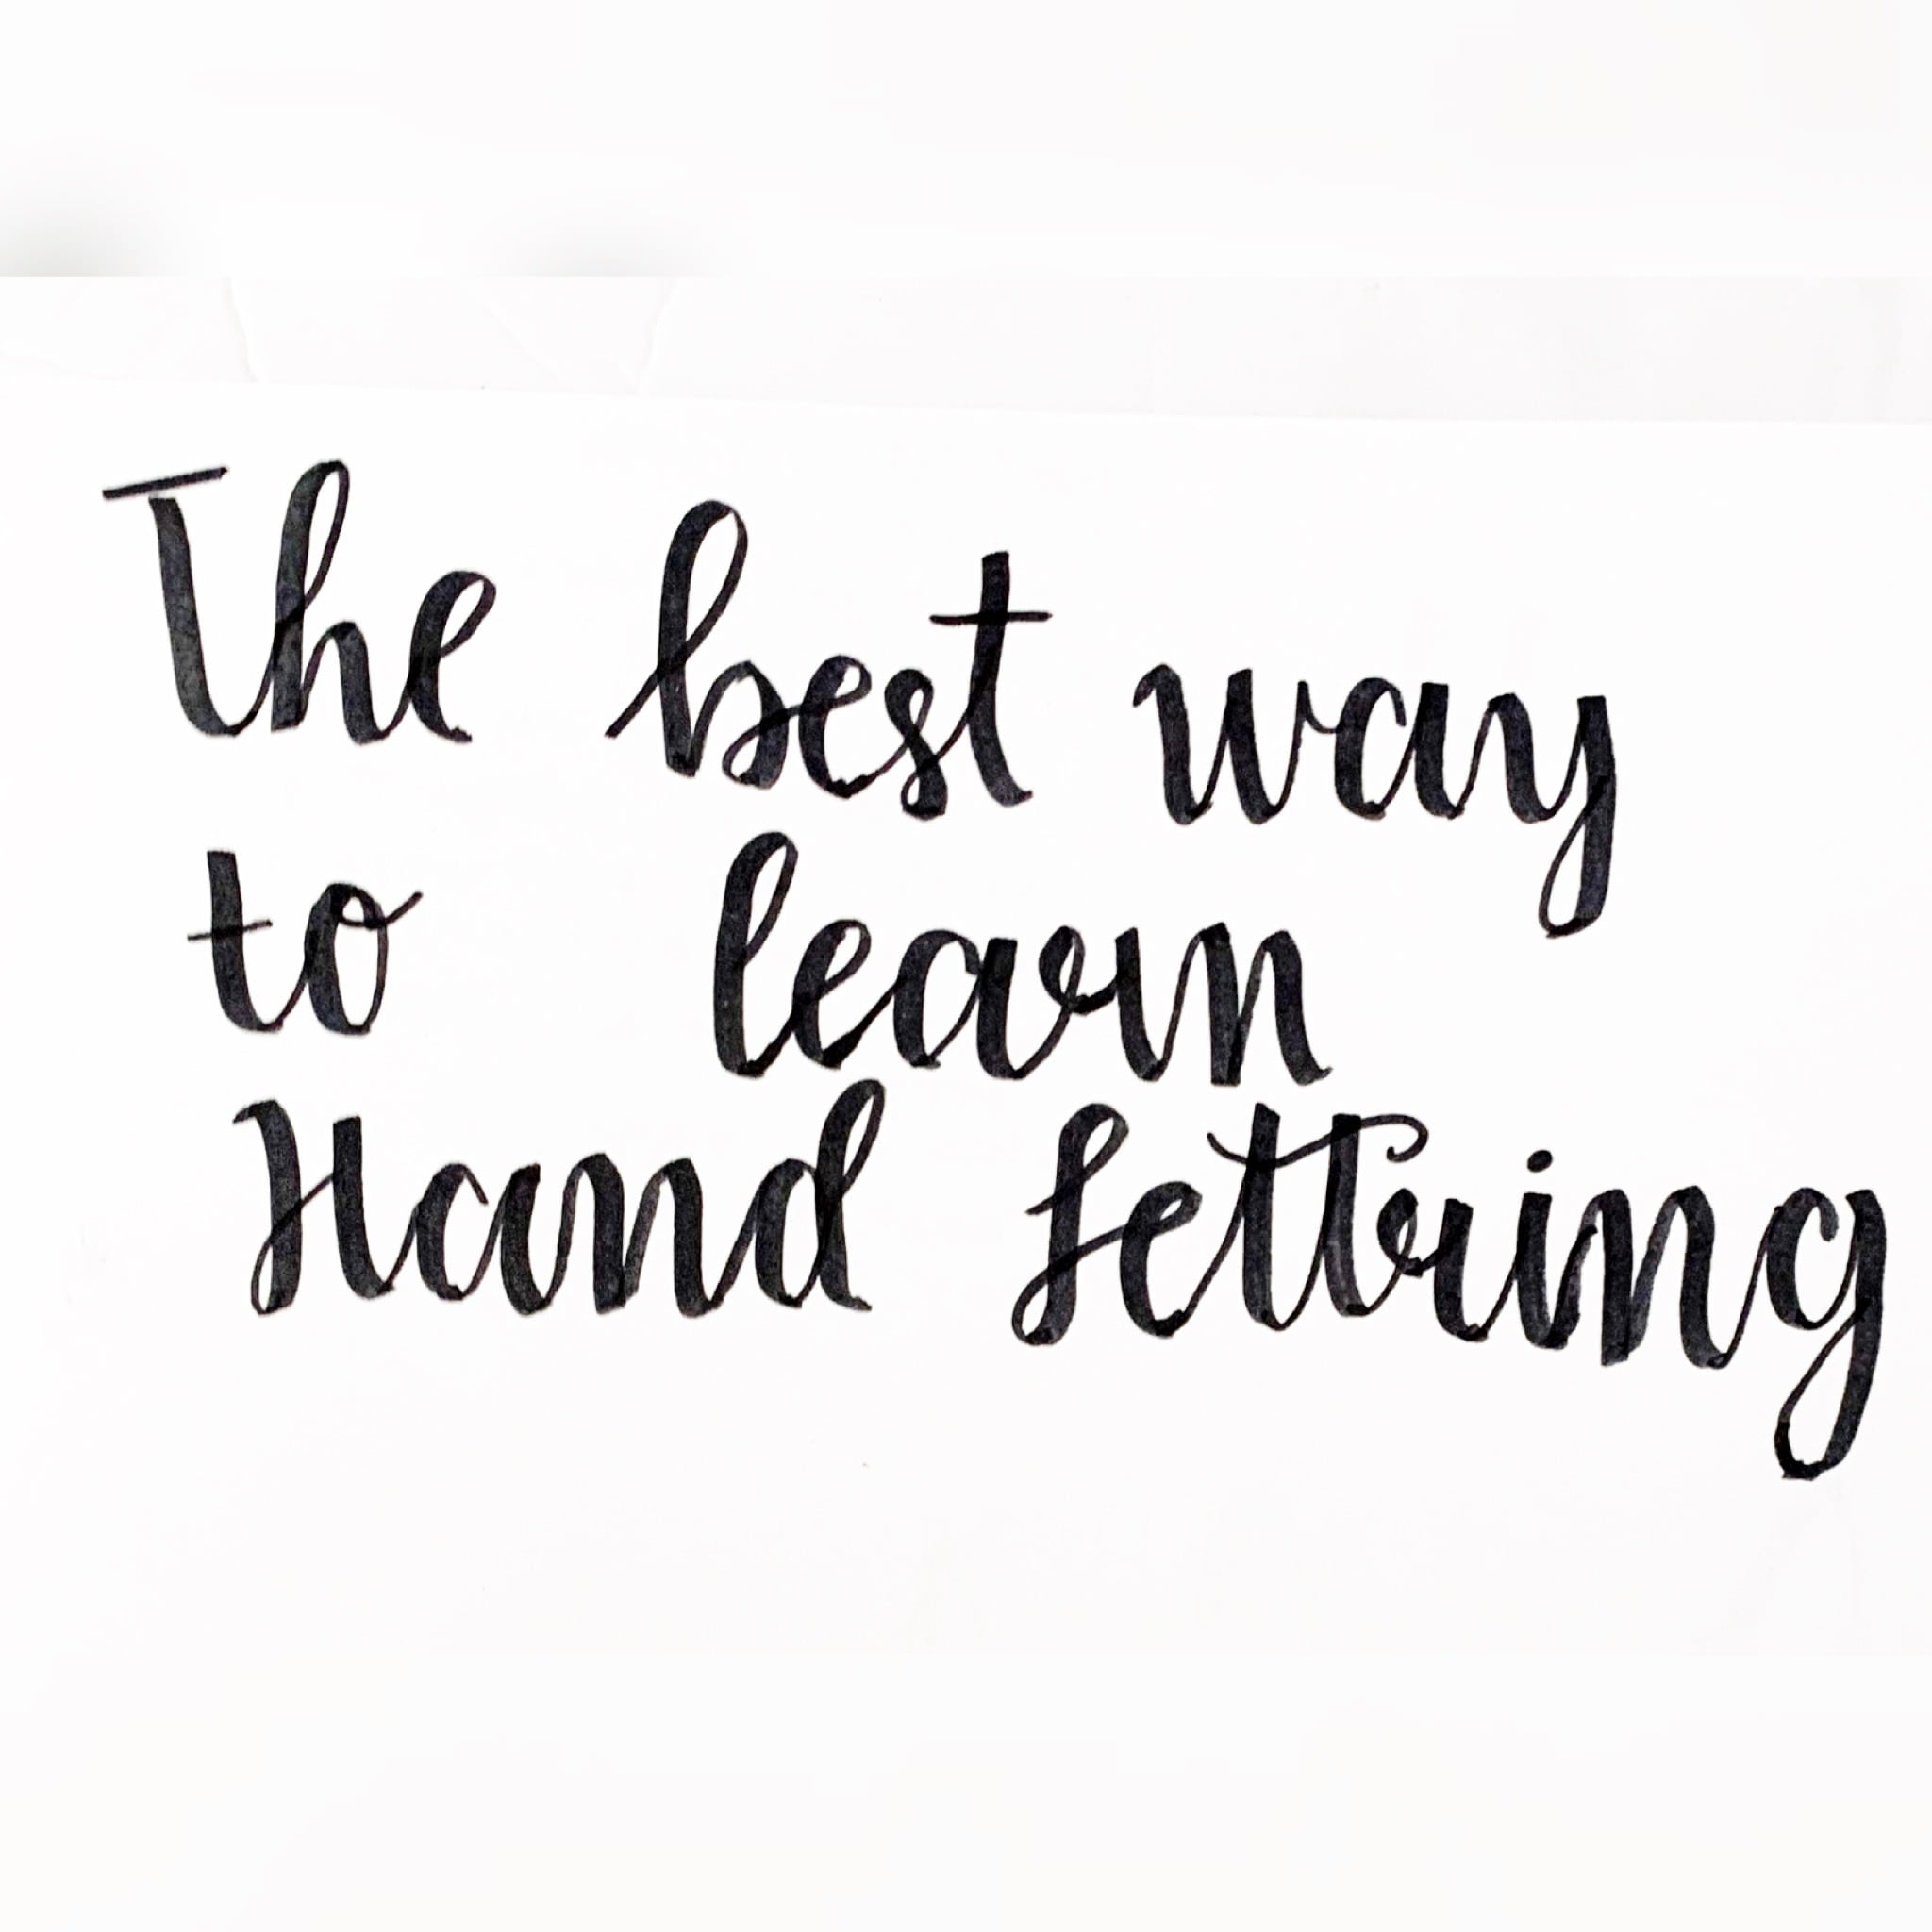 What Is The Best Way To Learn Hand Lettering